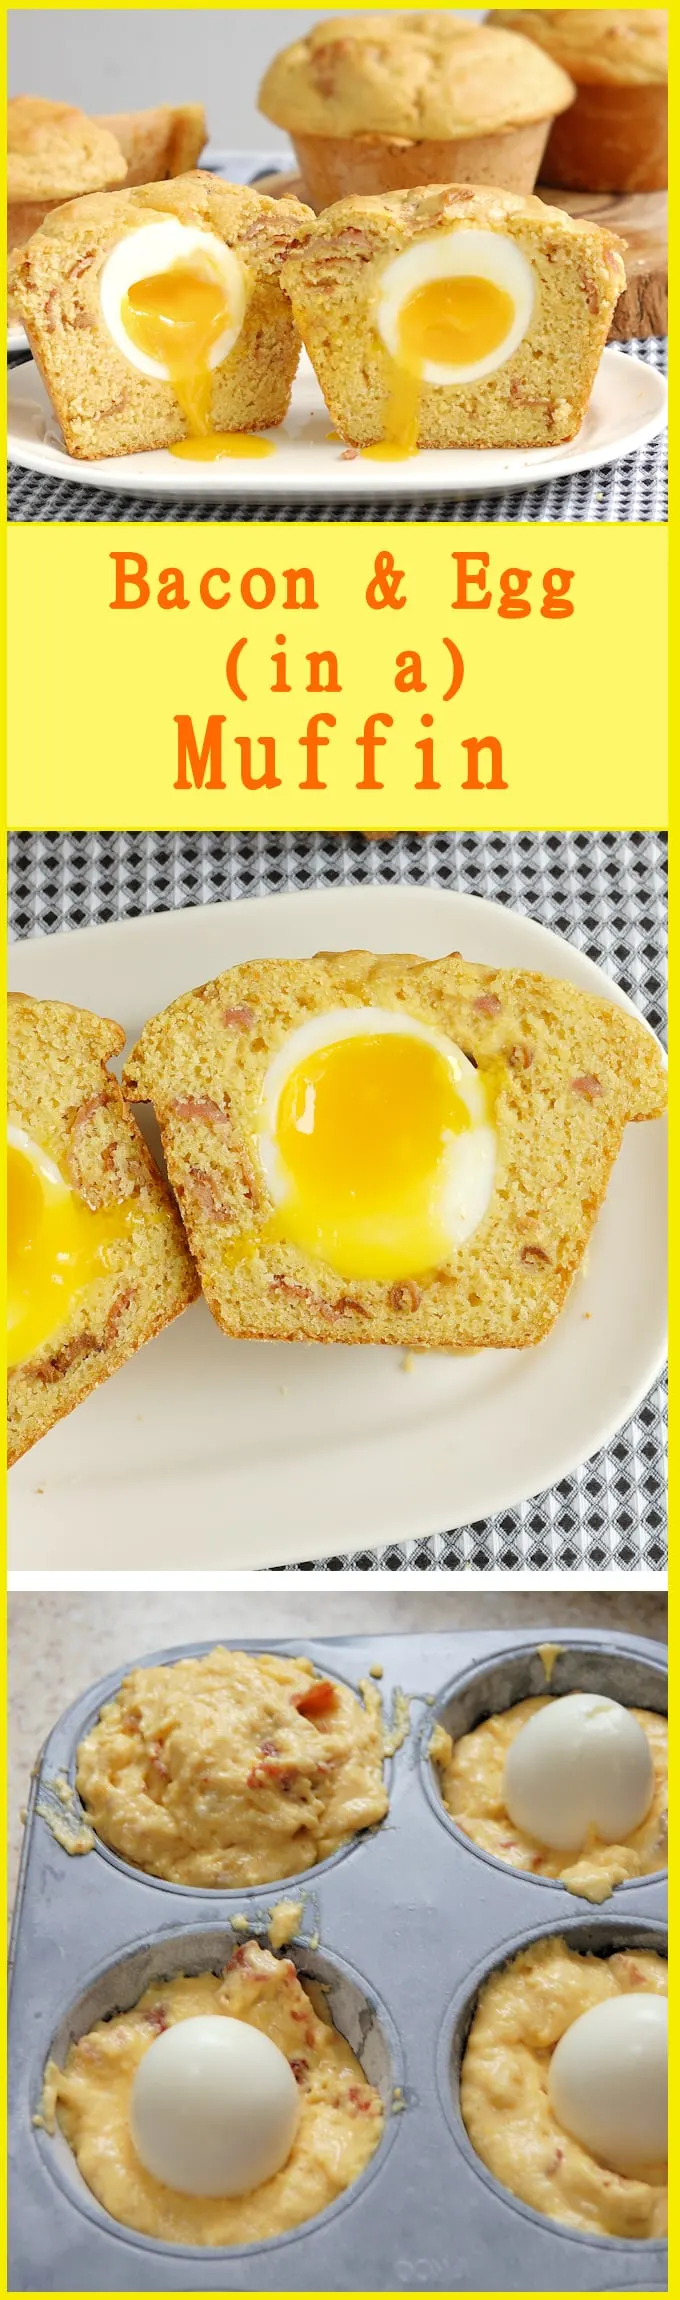 Here's a great new brunch idea! Jumbo corn muffins are flavored with bacon and maple syrup and, get this, there's a runny-yolk egg baked into each muffin. The recipe includes a video that shows the secret to creating this fun and surprisingly easy recipe.